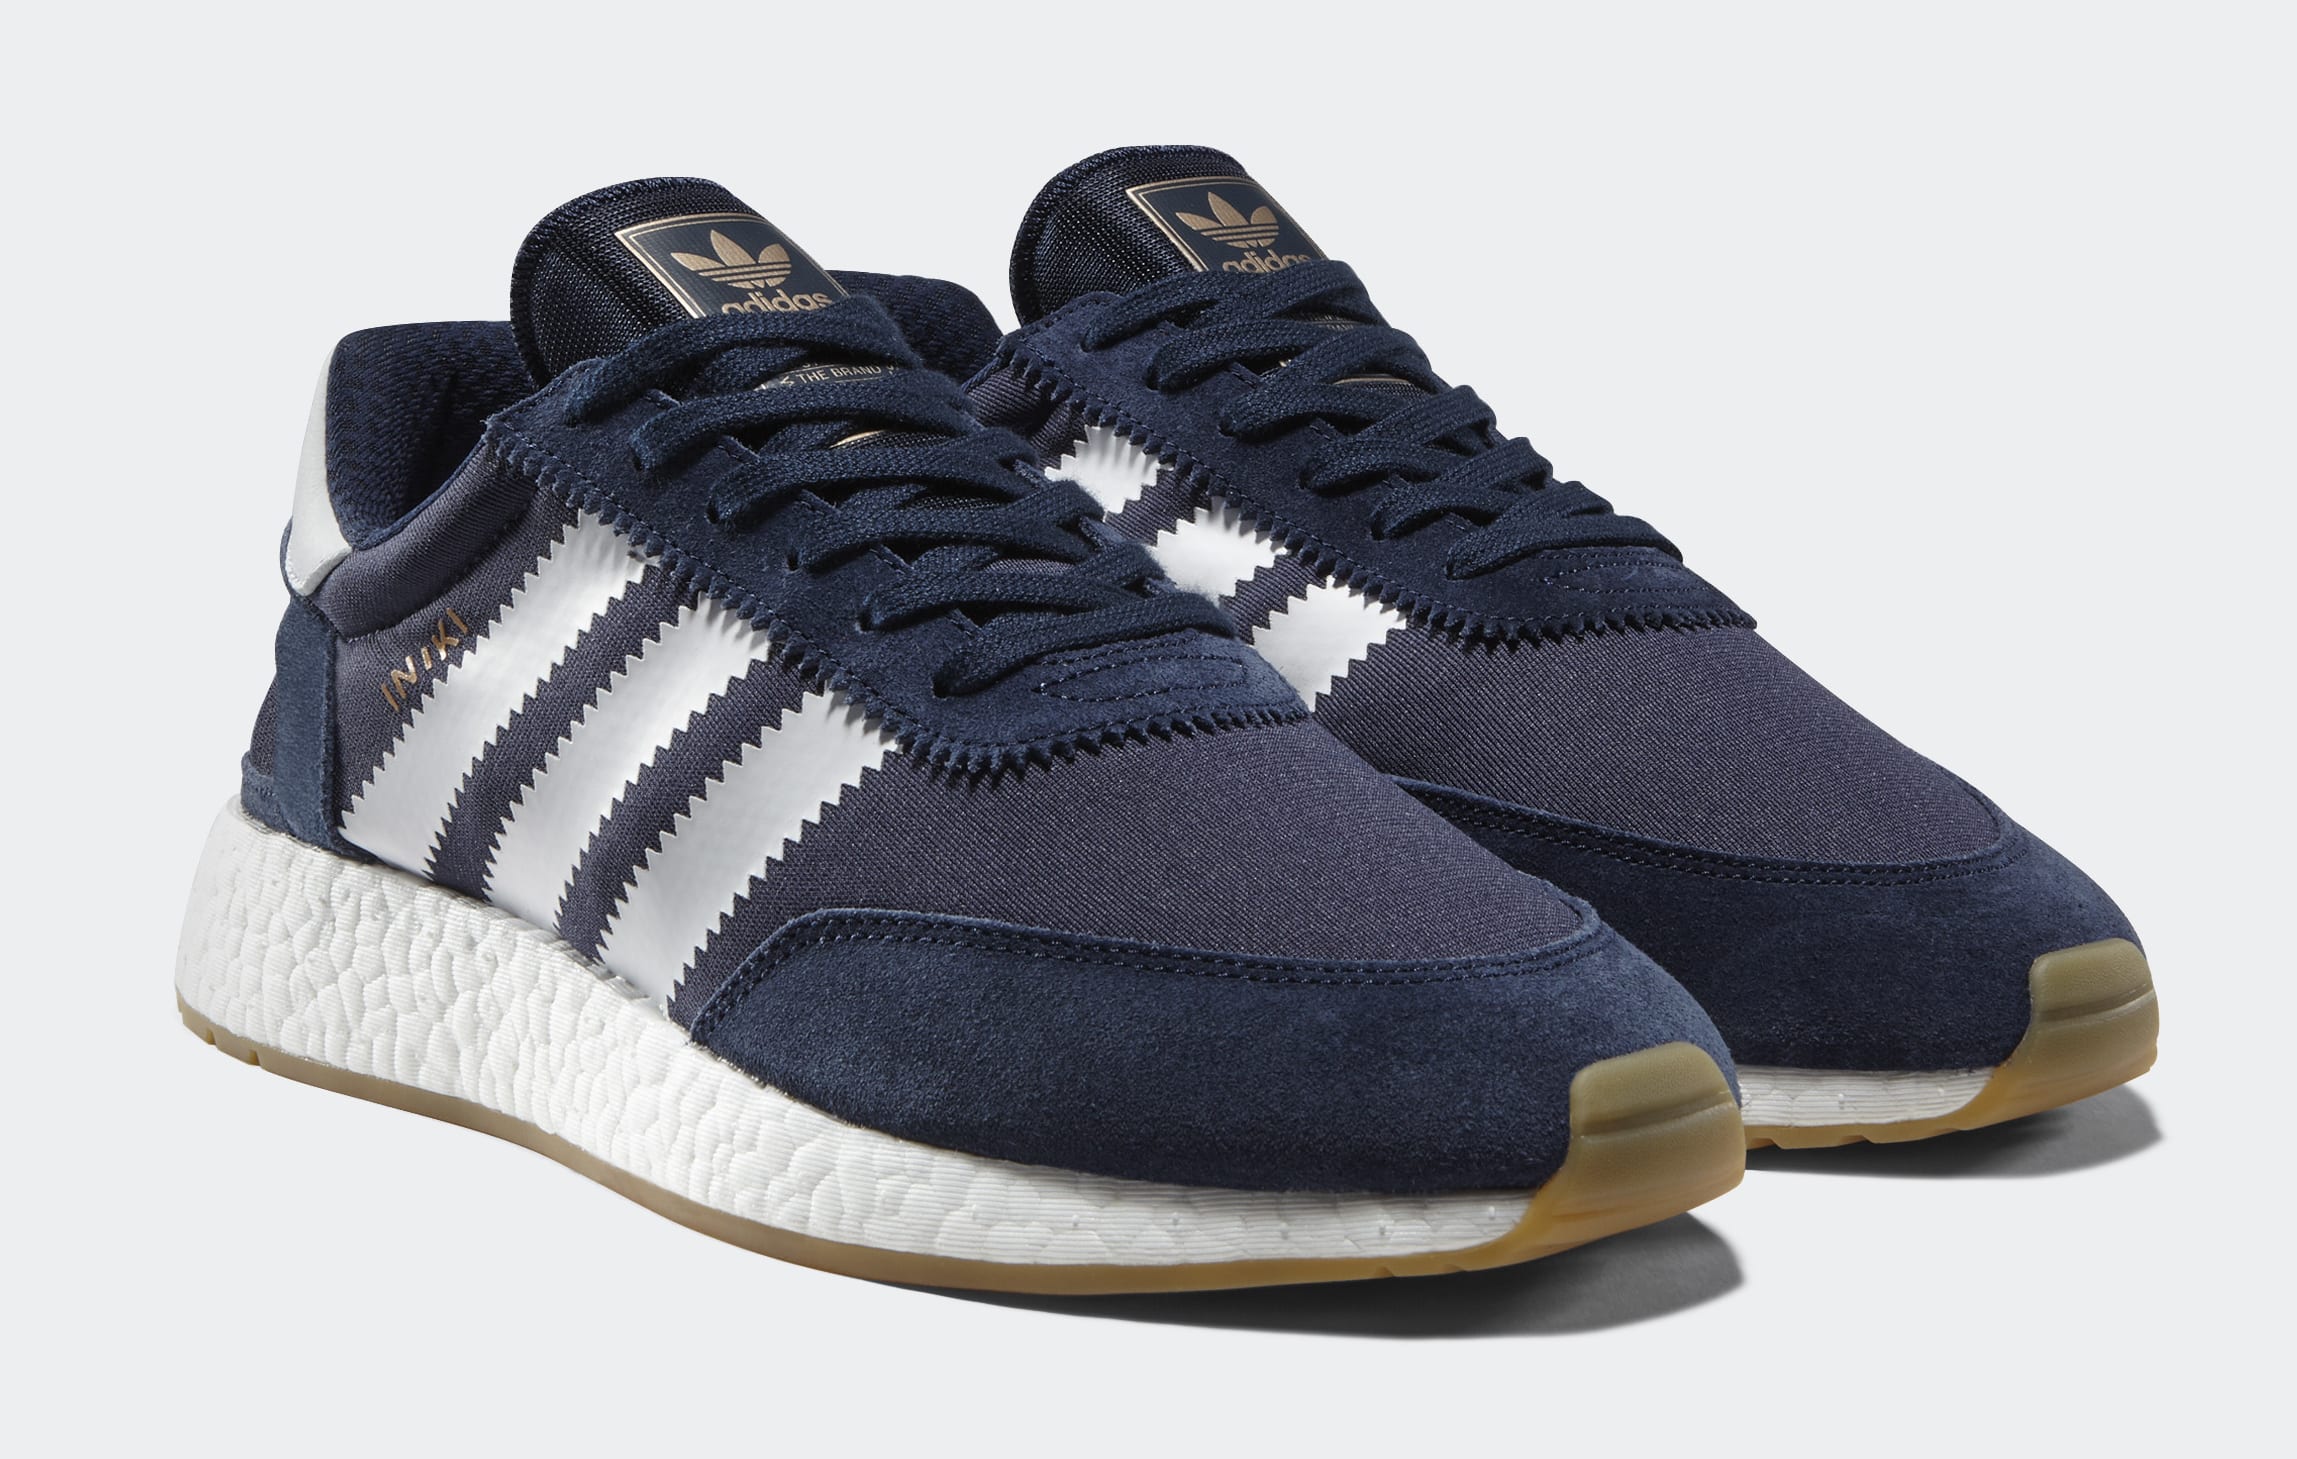 Adidas Iniki Runner Release Information | Sole Collector